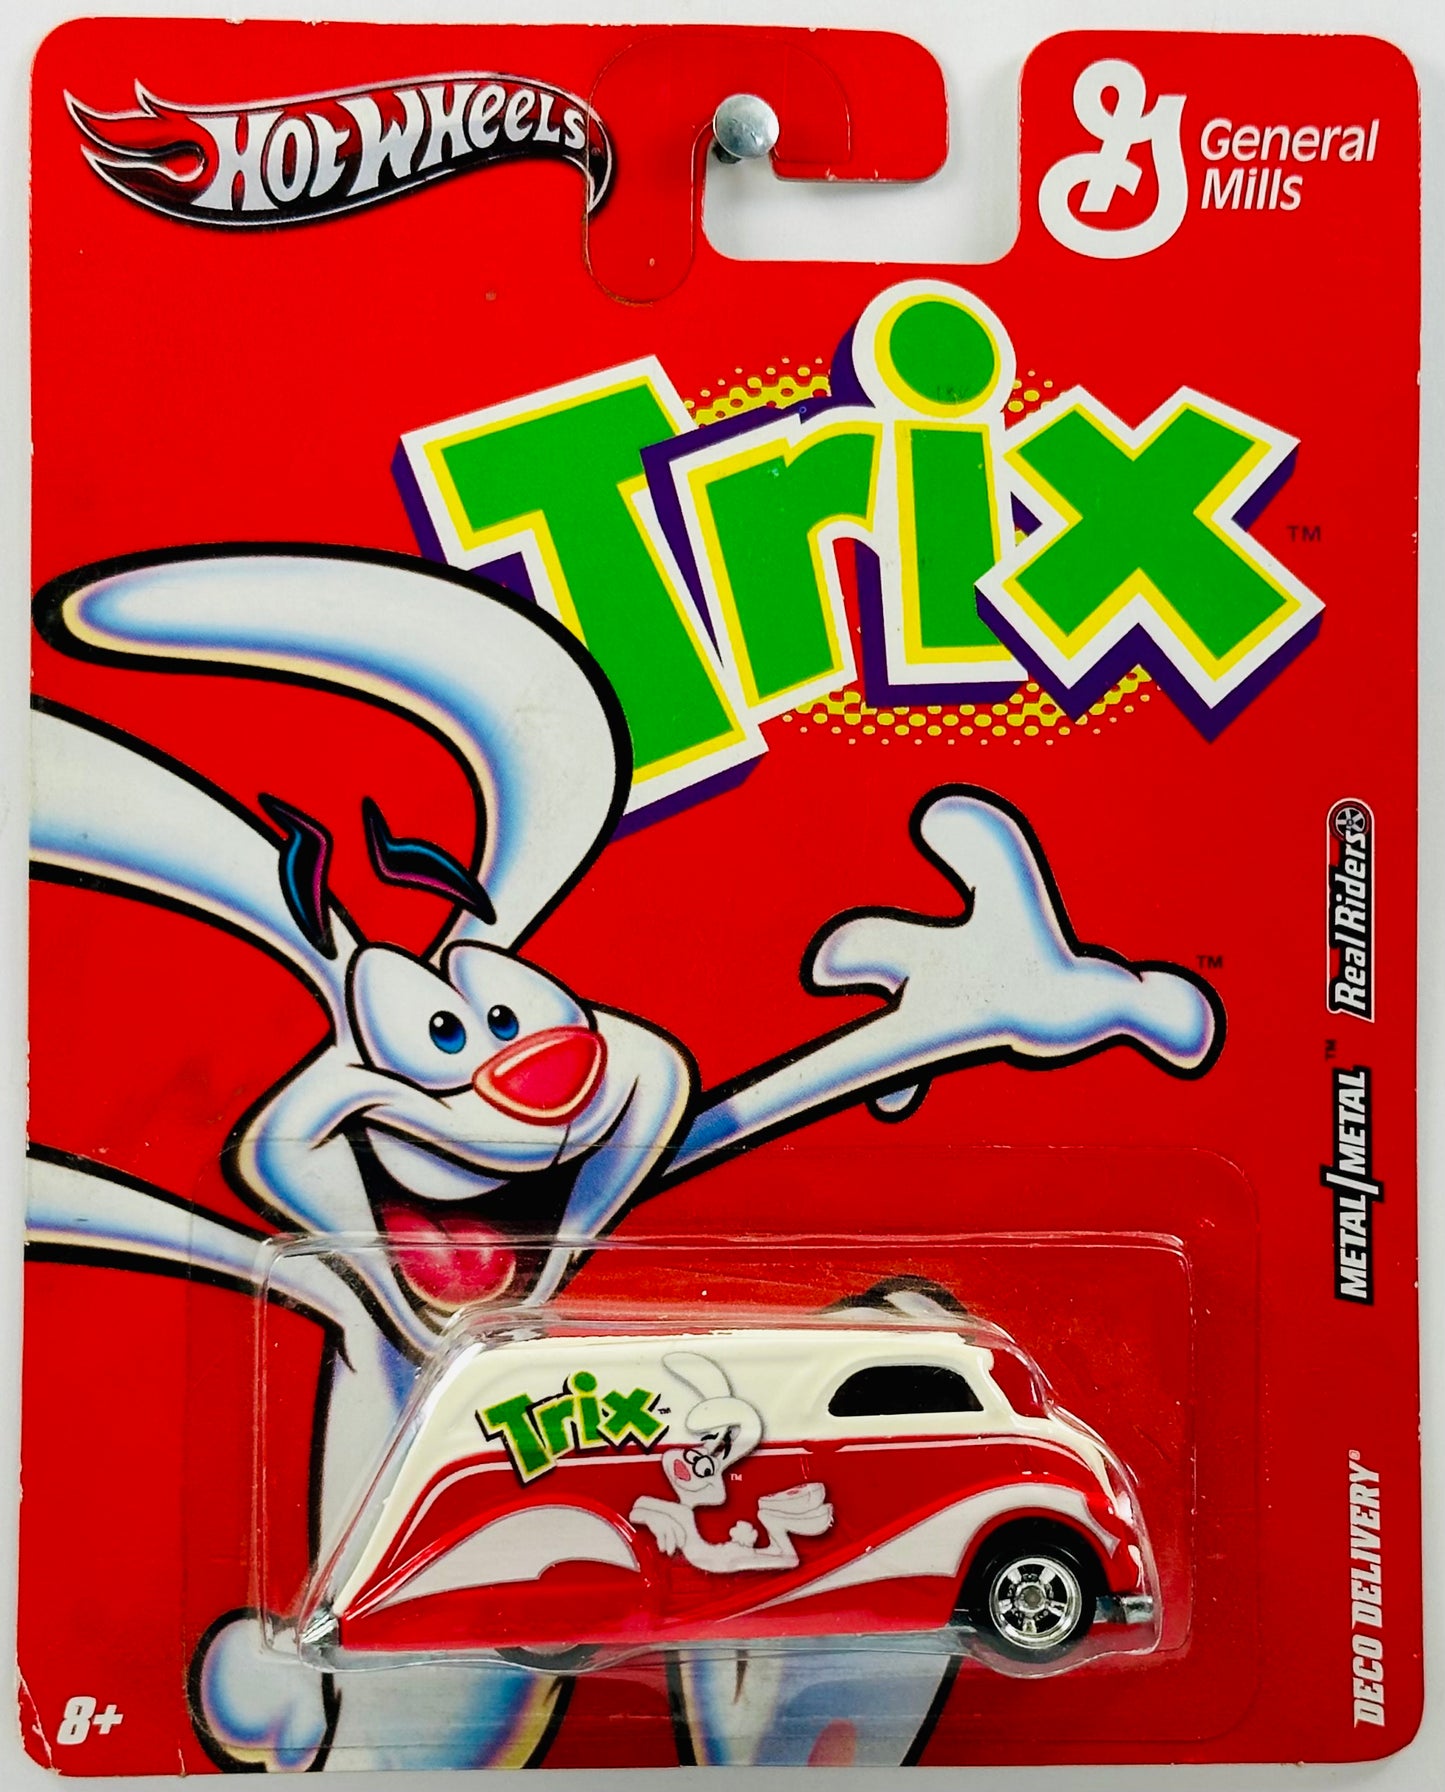 Hot Wheels 2011 - Premium / Pop Culture / General Mills - Deco Delivery - Red & White / Trix - Metal/Metal & Real Riders